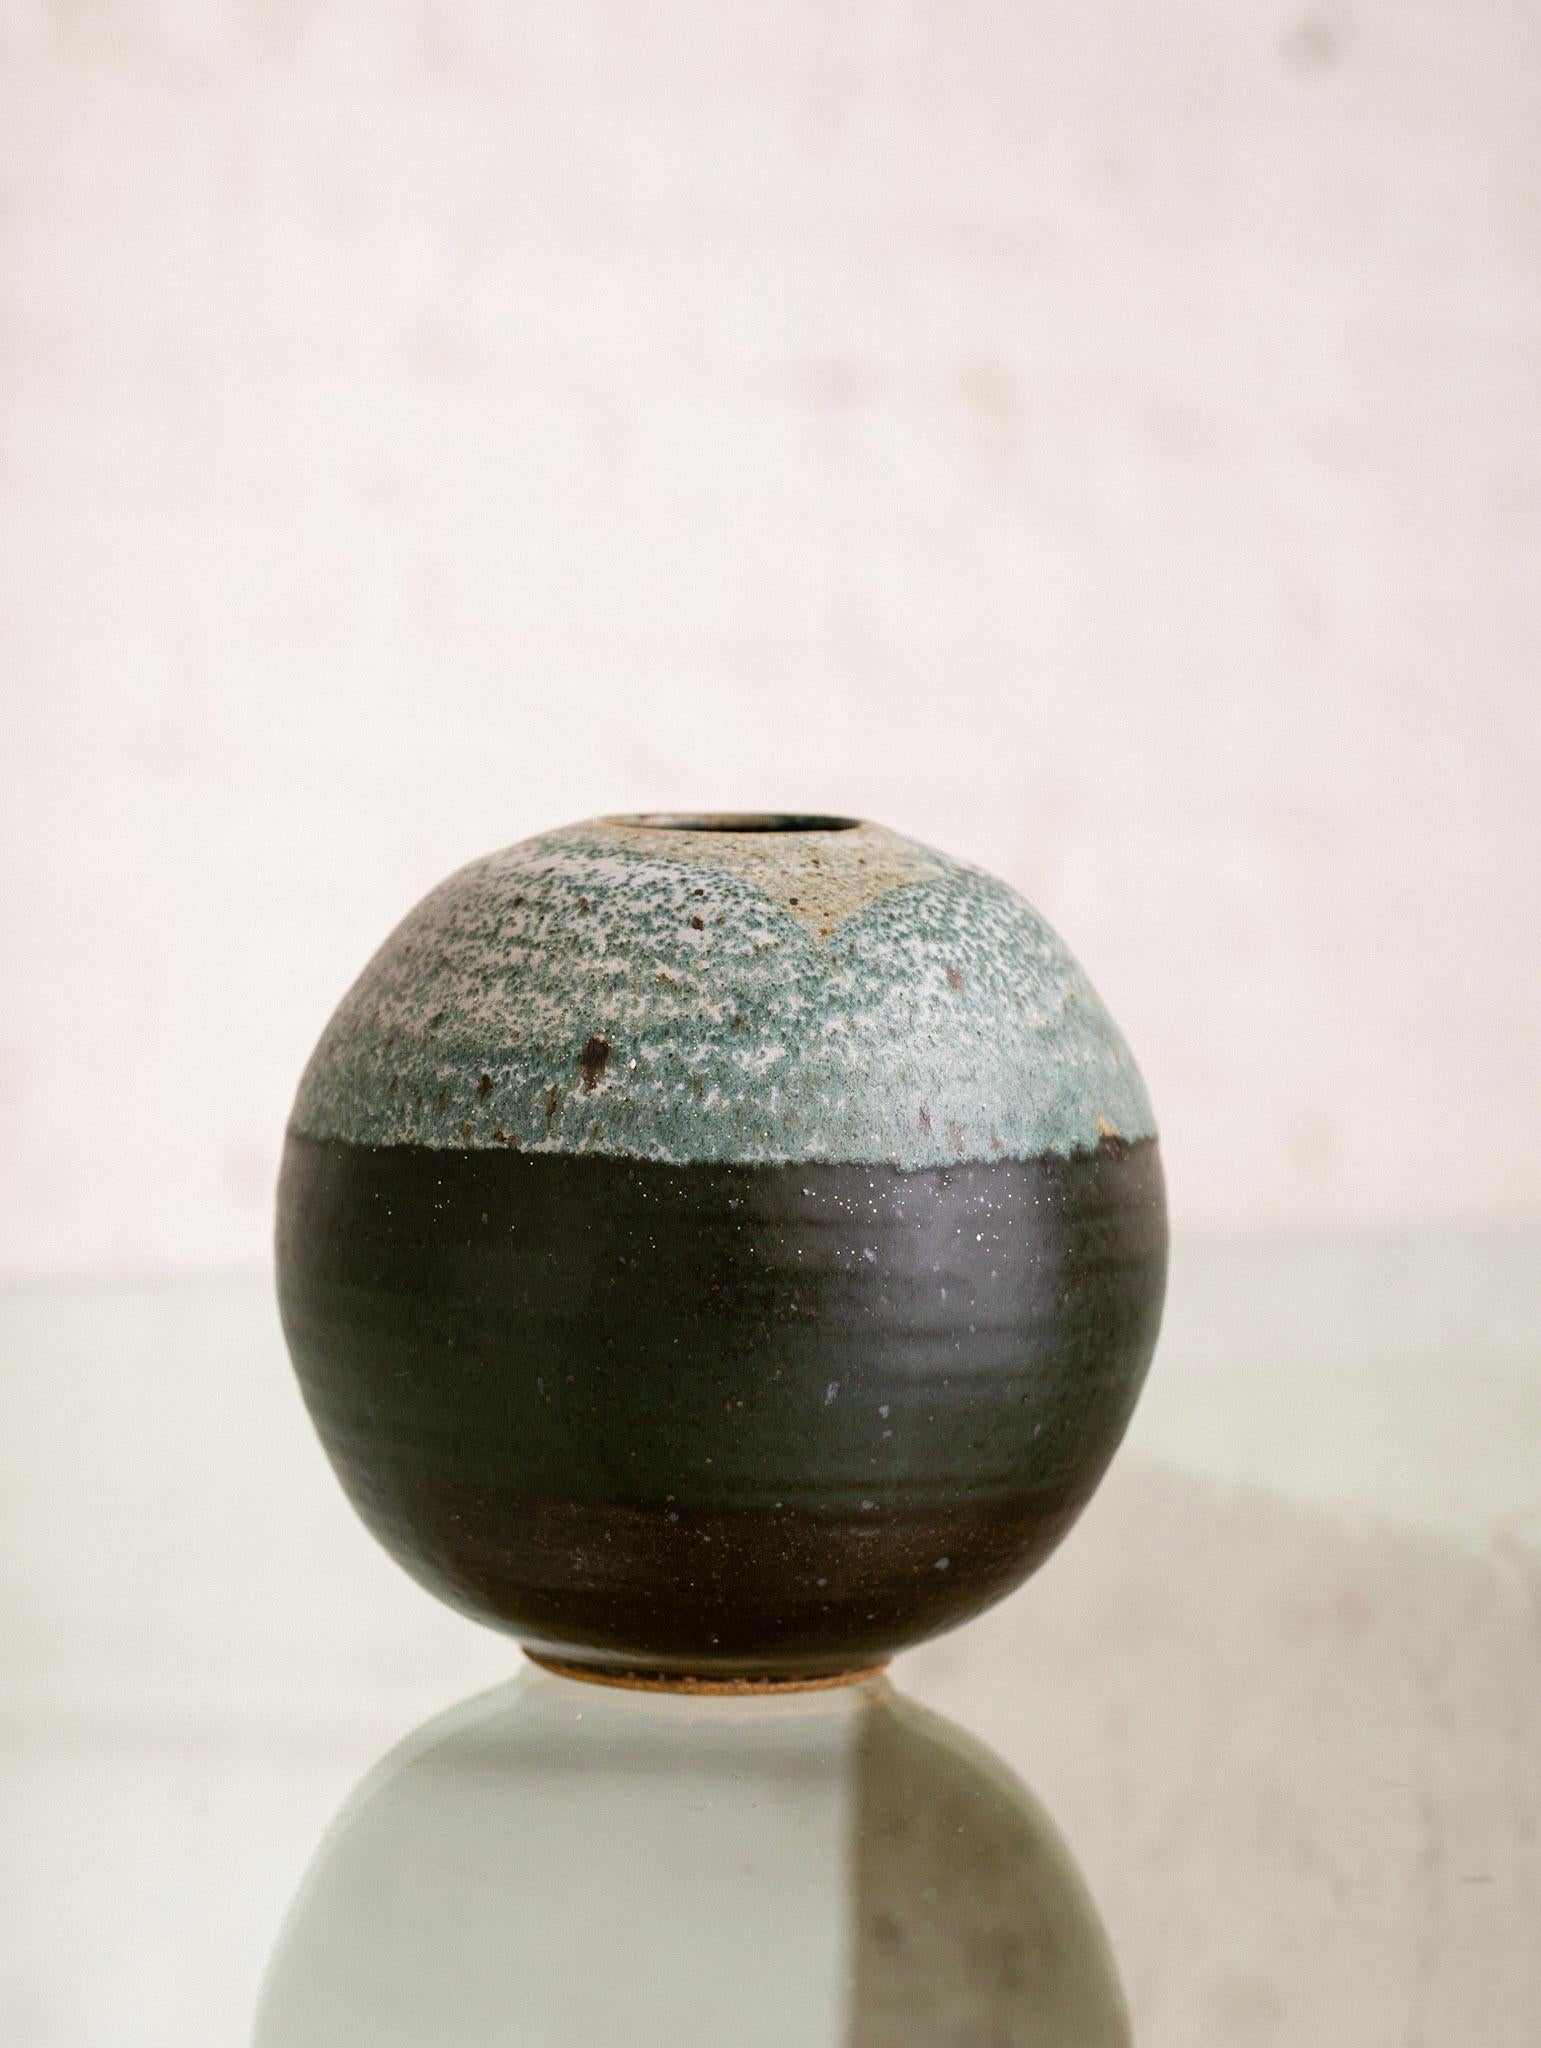 Studio pottery vase. Globe form with two toned teal glaze.